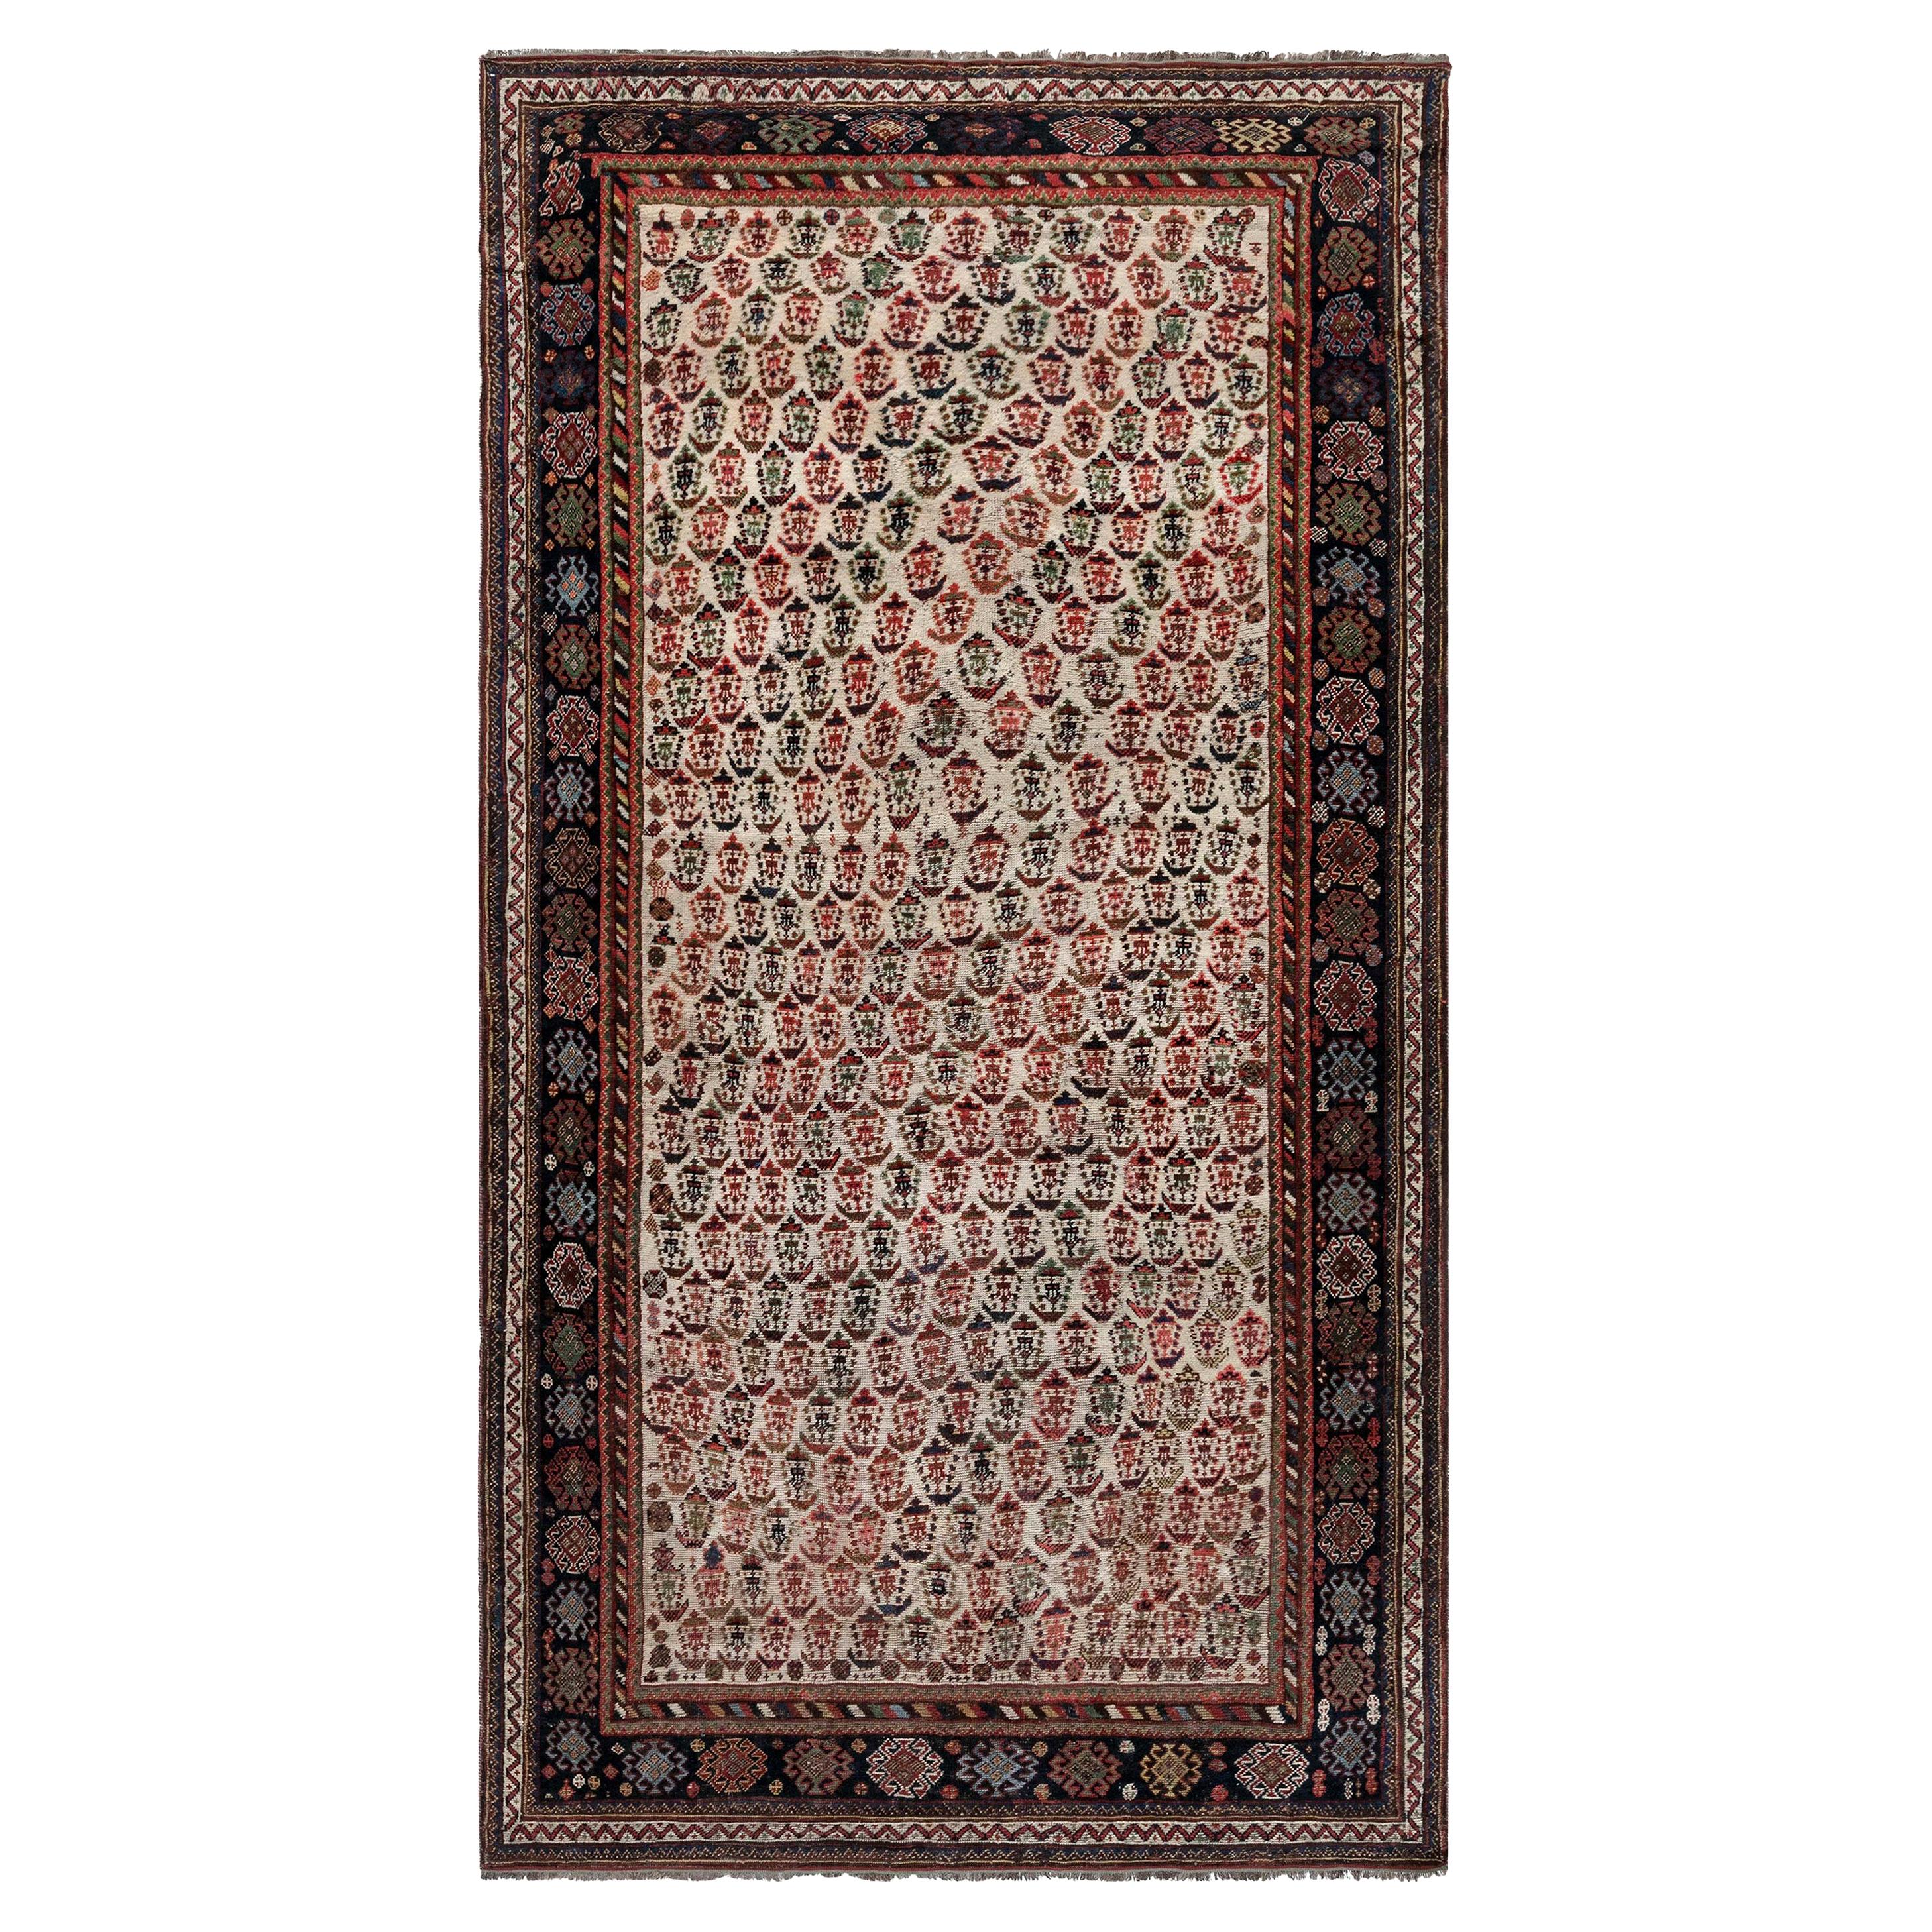 Authentic Persian Afshar Blue, Brown, Green, Red, White Rug by Doris Leslie Blau